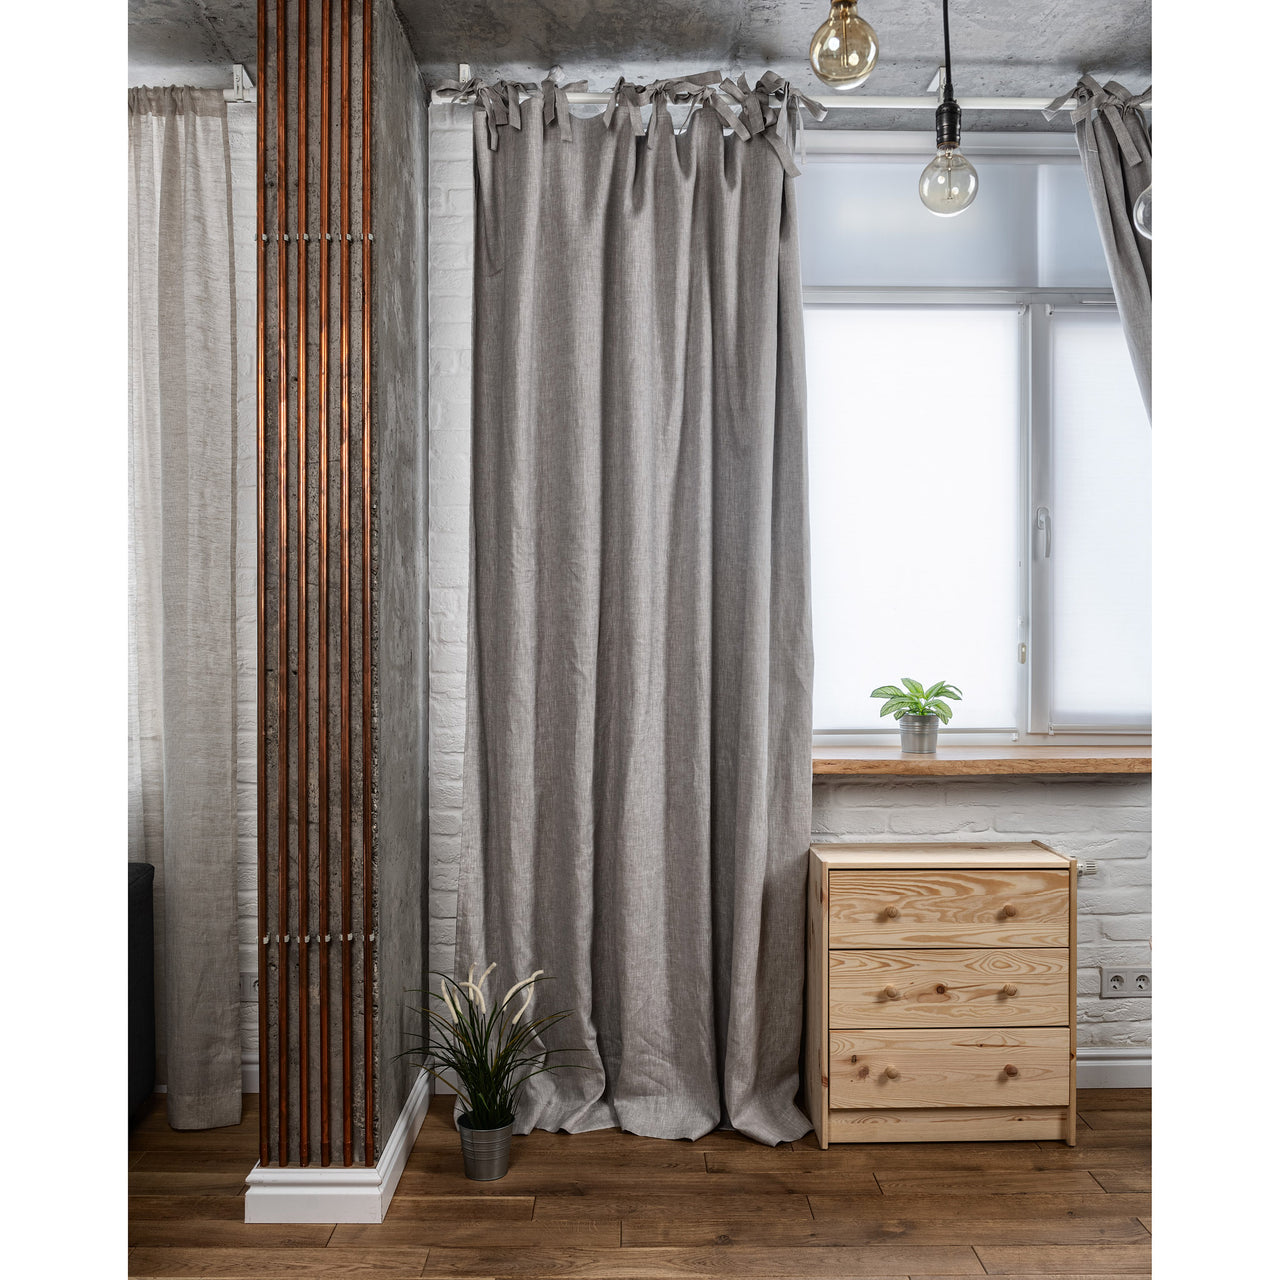 Linen Top Tie Curtain Panel with Blackout Lining - 124, 138 or 250 cm Width, Custom Length - Natural Linen Oatmeal/White/Grey Colours